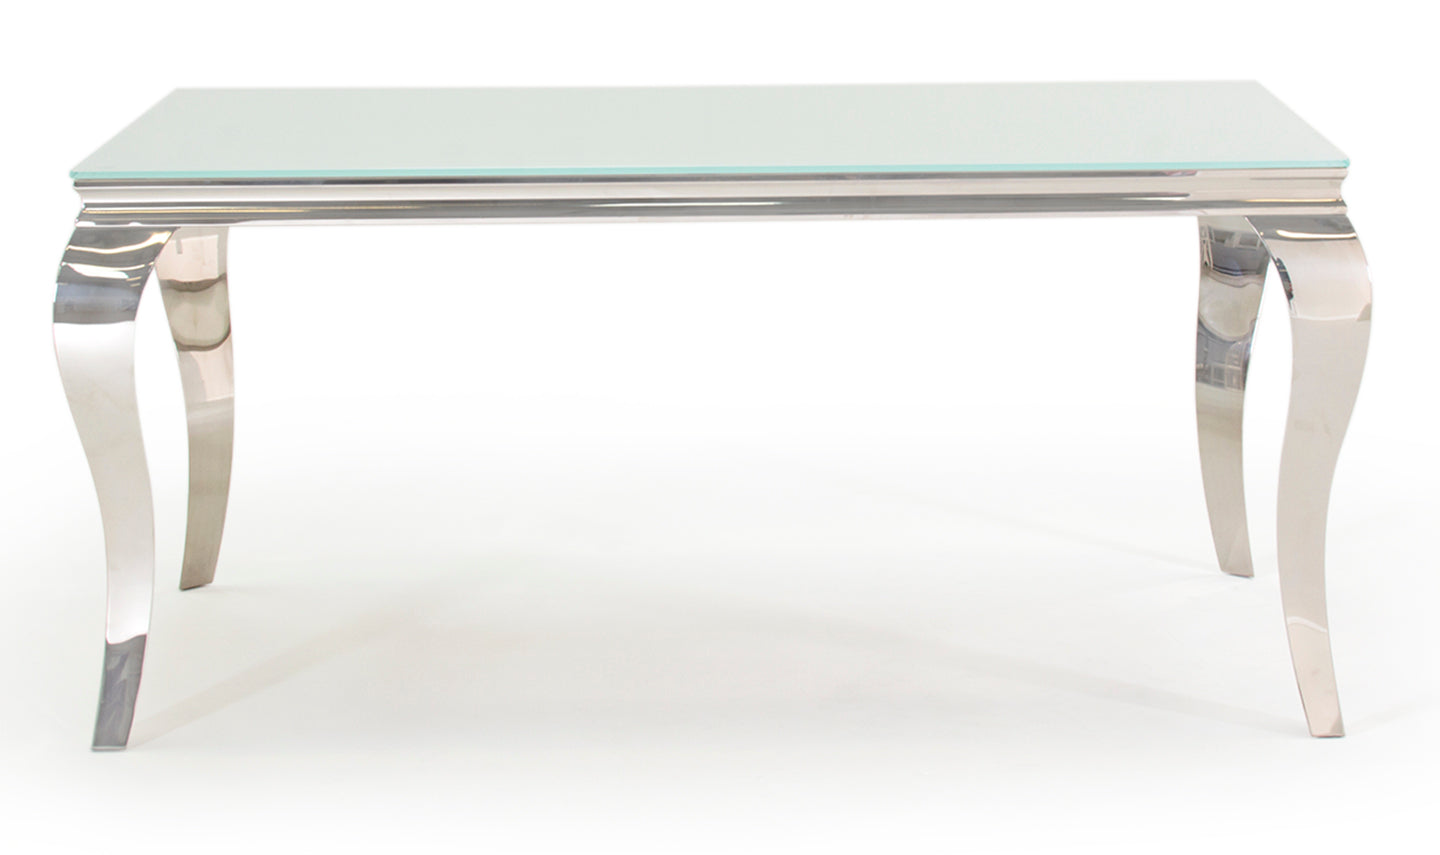 Louis white dining table 160 cm chrome and white glass reduced to clear-Renaissance Design Studio